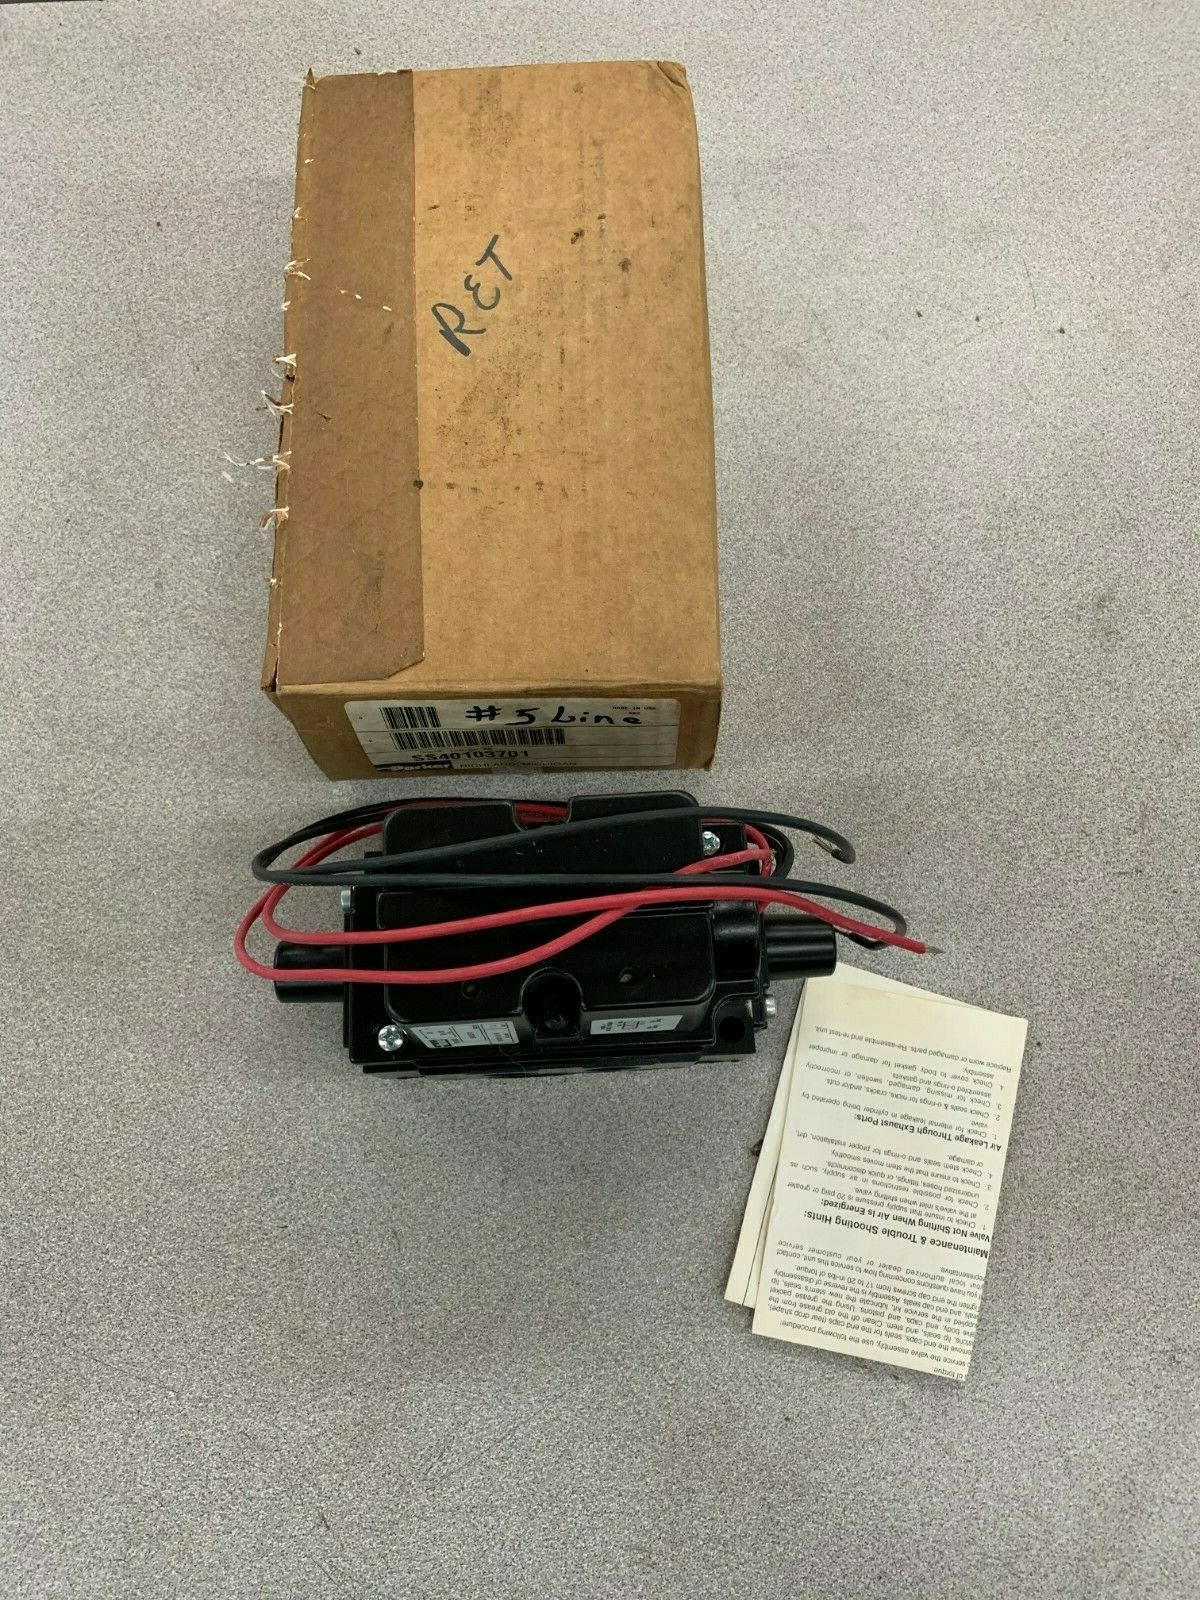 NEW IN BOX PARKER 110/120V. PNEUMATIC SOLENOID CONTROL VALVE SS40103701